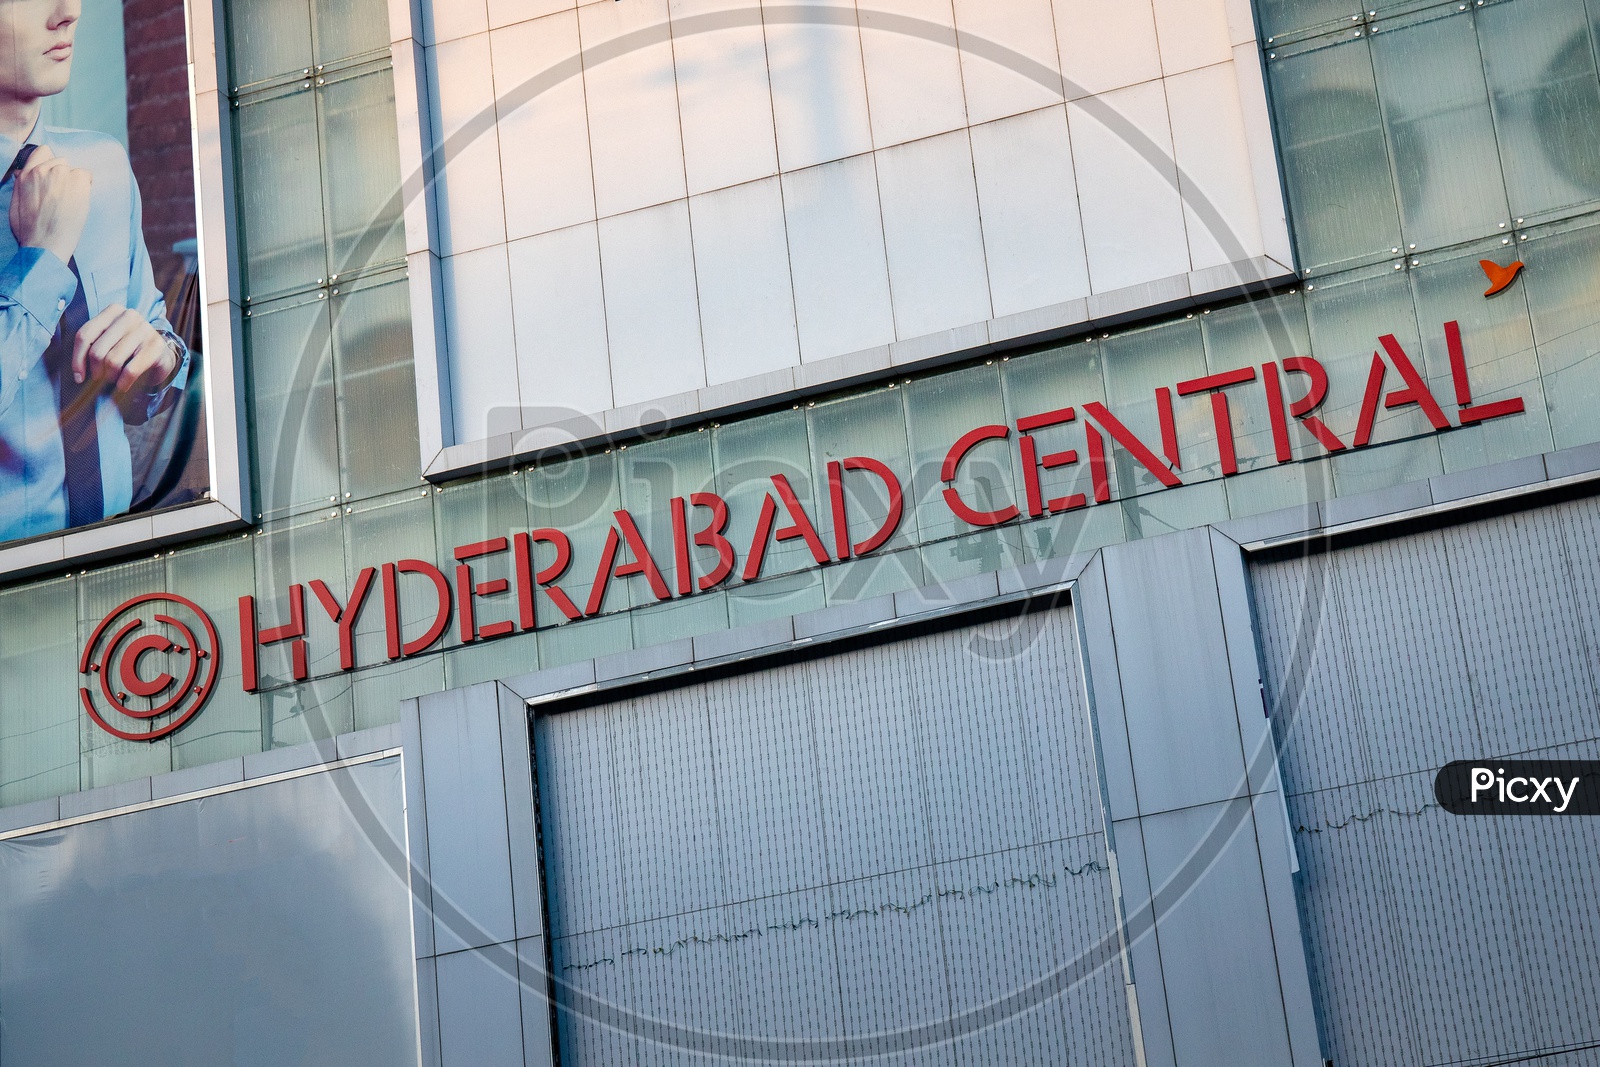 Hyderabad Central  Mall Name on Mall Facade